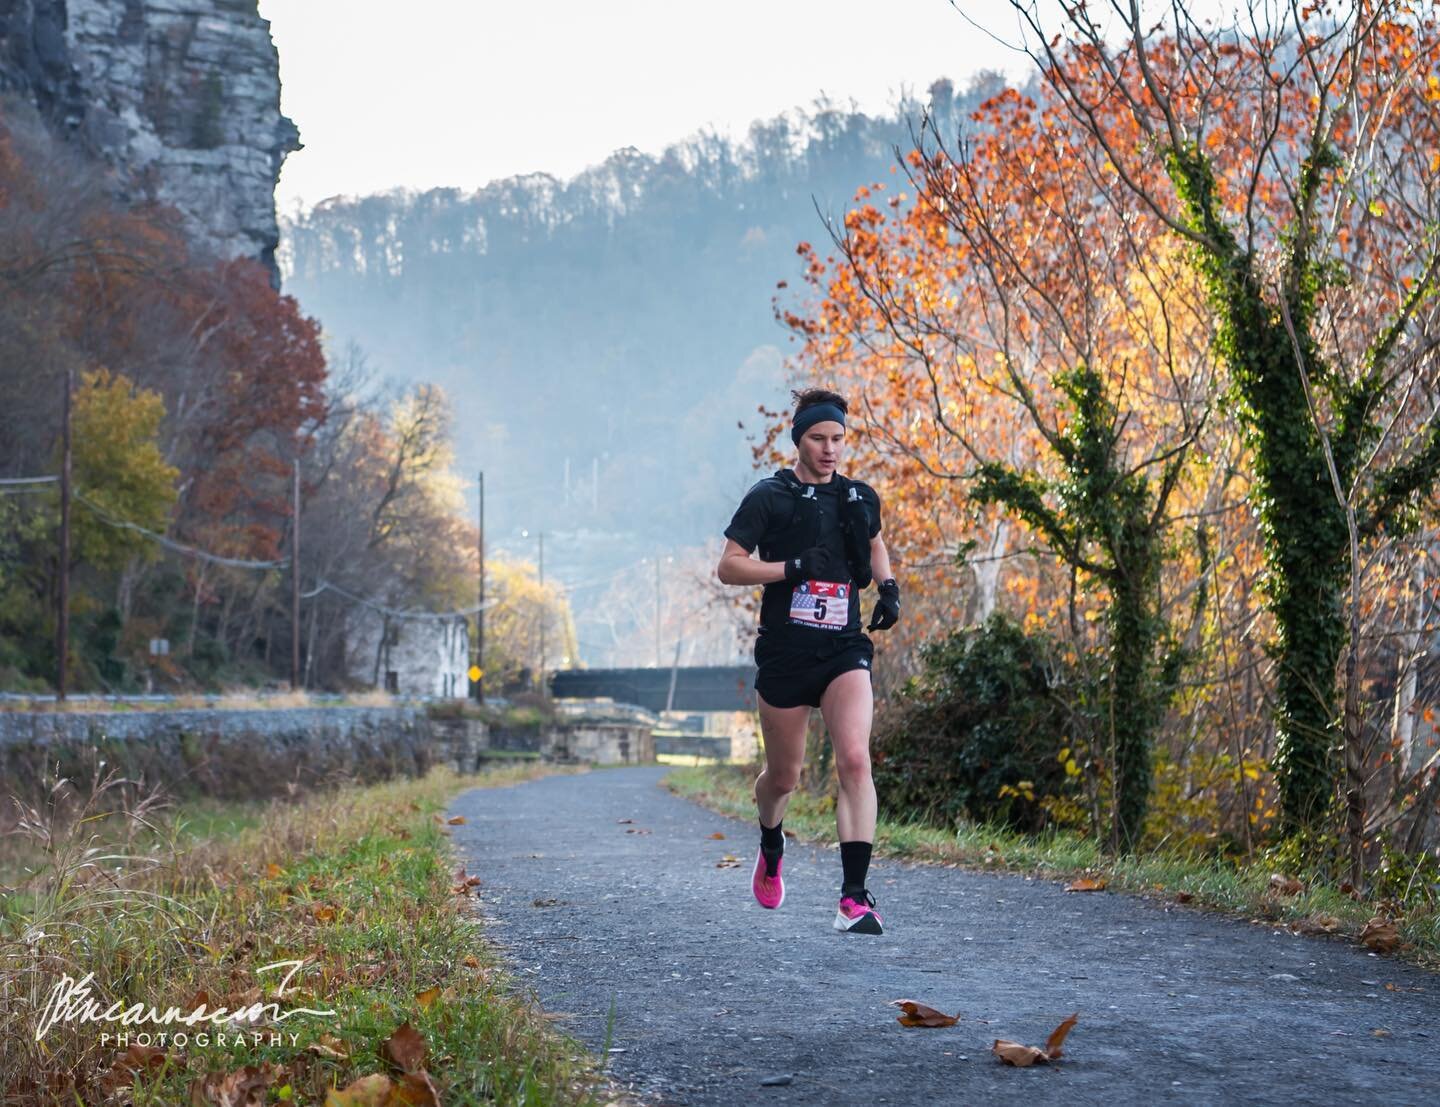 A race report from #JFK50 is up at the link in my bio for anyone interested enough to give it a read. Thanks to @paulenki for this shot!